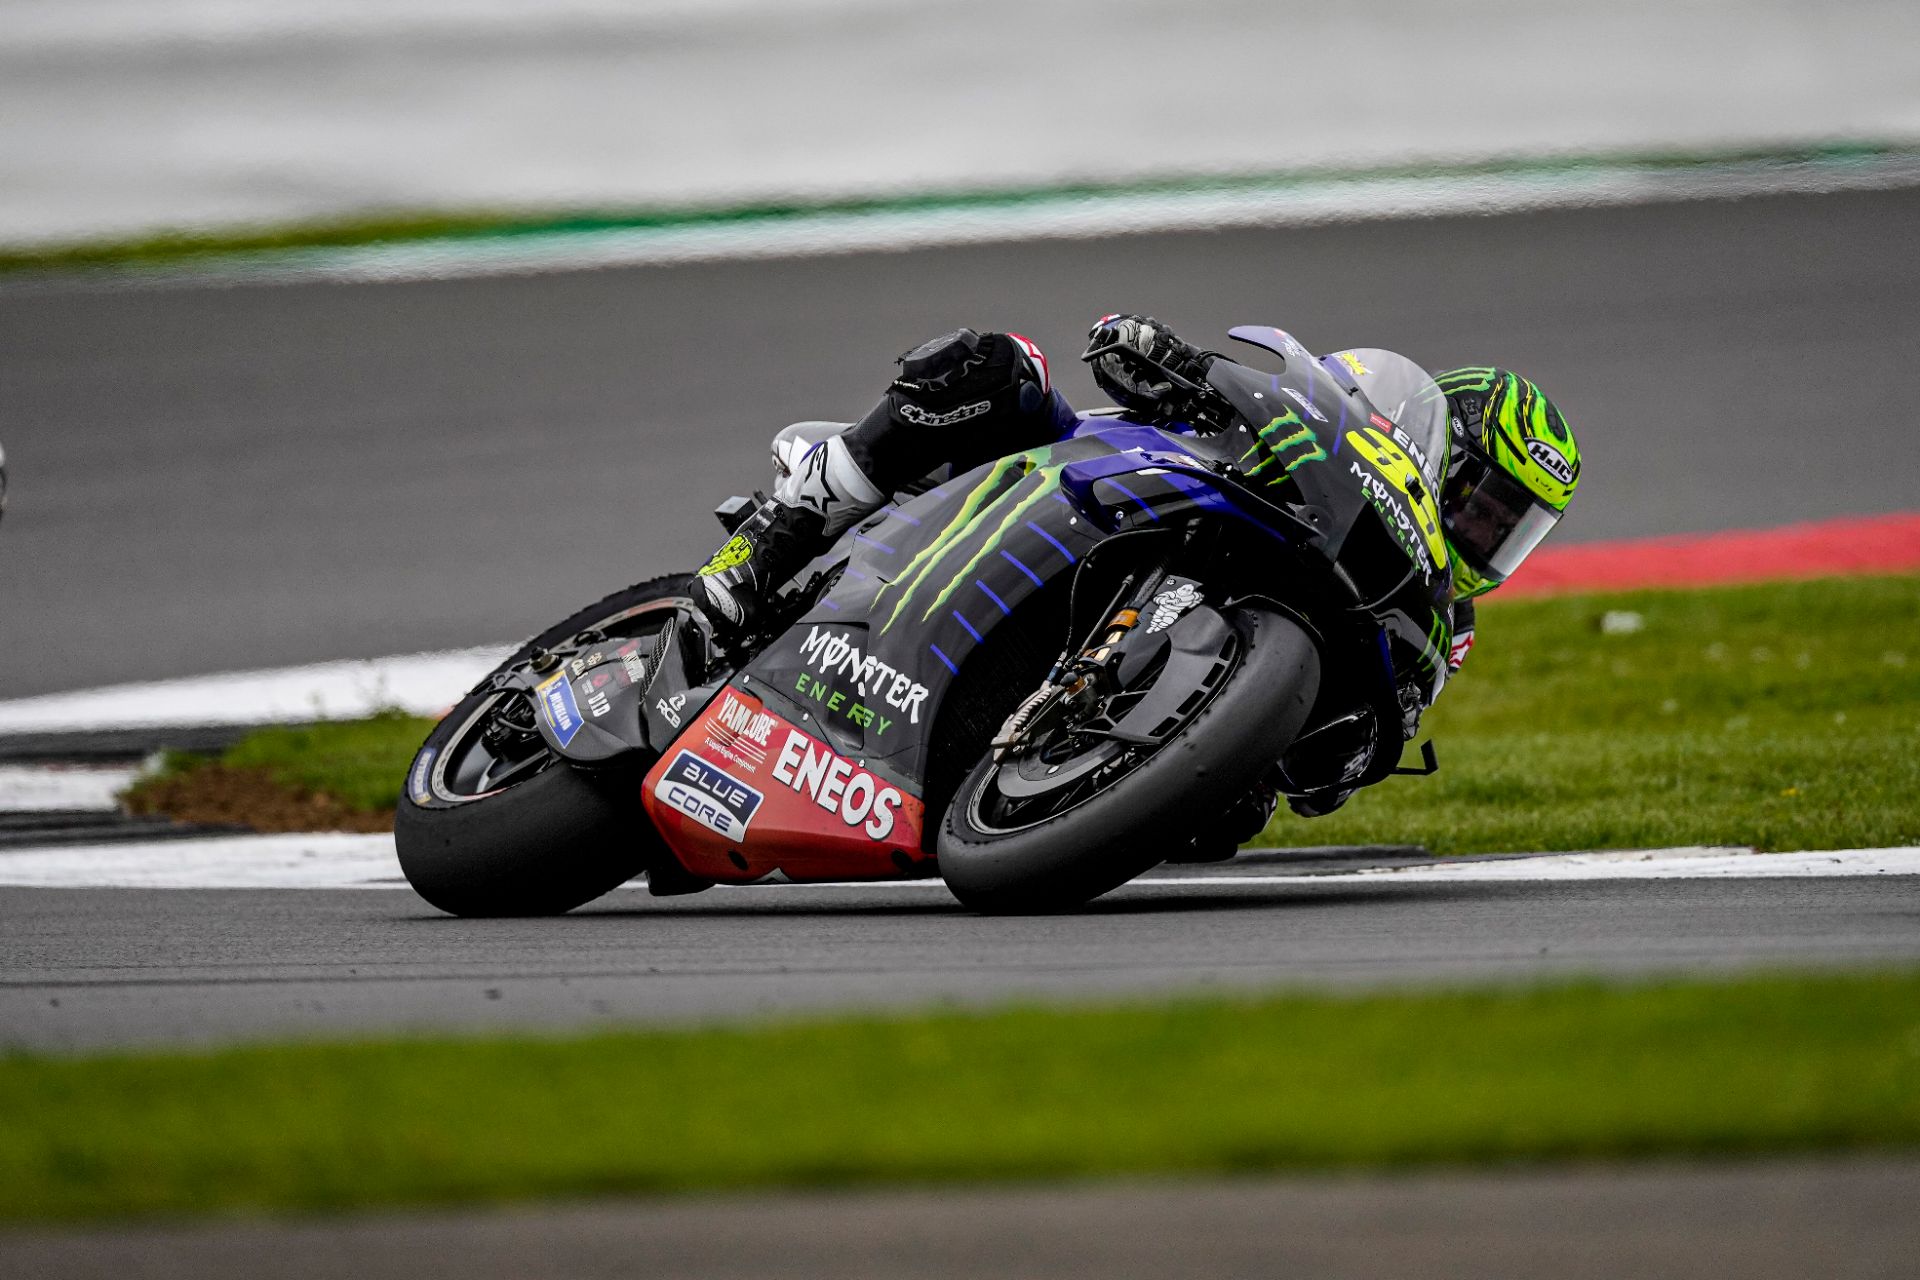 Crutchlow : disappointed about the result, proud about our weekend